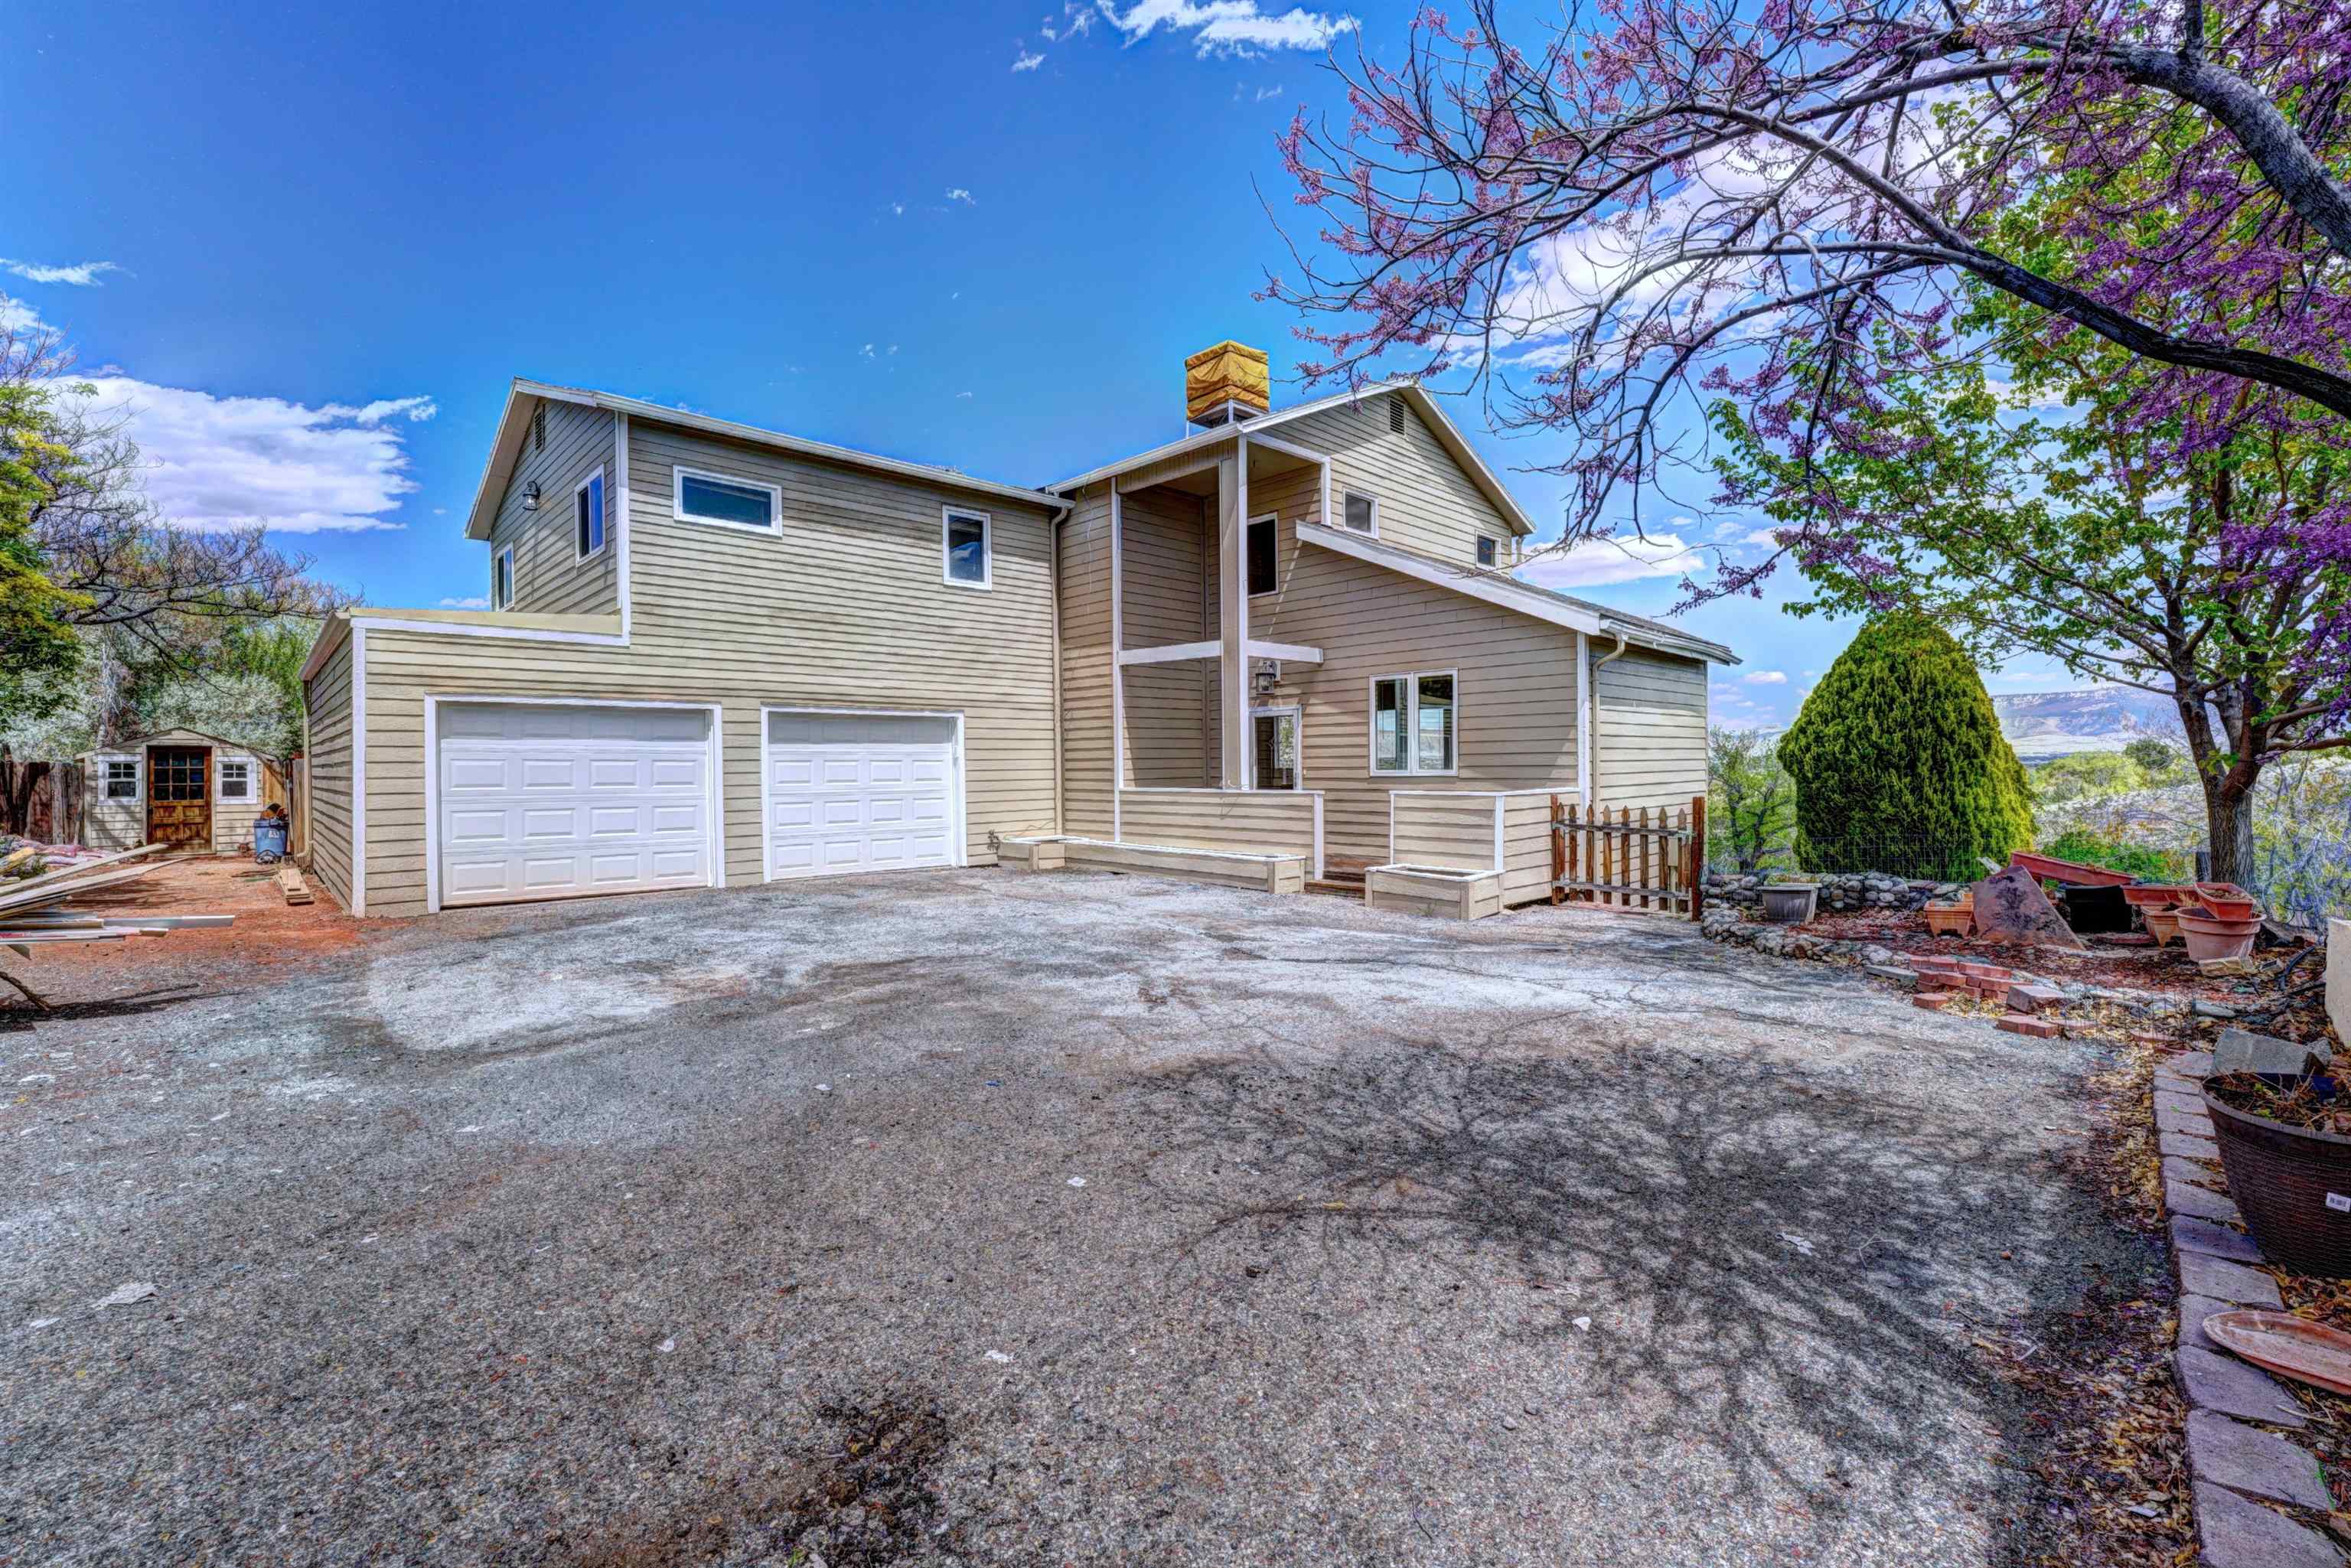 **Open House Tues. May 7th 4-6 pm**   Step into your next home with this great 5-bedroom, 2.5-bath home, spanning over 3,300 square feet in the Ridges neighborhood. Freshly painted inside and out, this residence has beautiful unobstructed views of the Book Cliffs, Mount Garfield, Grand Mesa, and twinkling city lights at night. The living area has high ceilings with abundant natural light creating the perfect place to entertain. The fully finished basement offers the perfect arrangement for multigenerational living, with a kitchenette and private deck.   Equipped with a newer roof and backed by a comprehensive pre-inspection, this home is VERIFIED and includes a 12-month home warranty at closing.